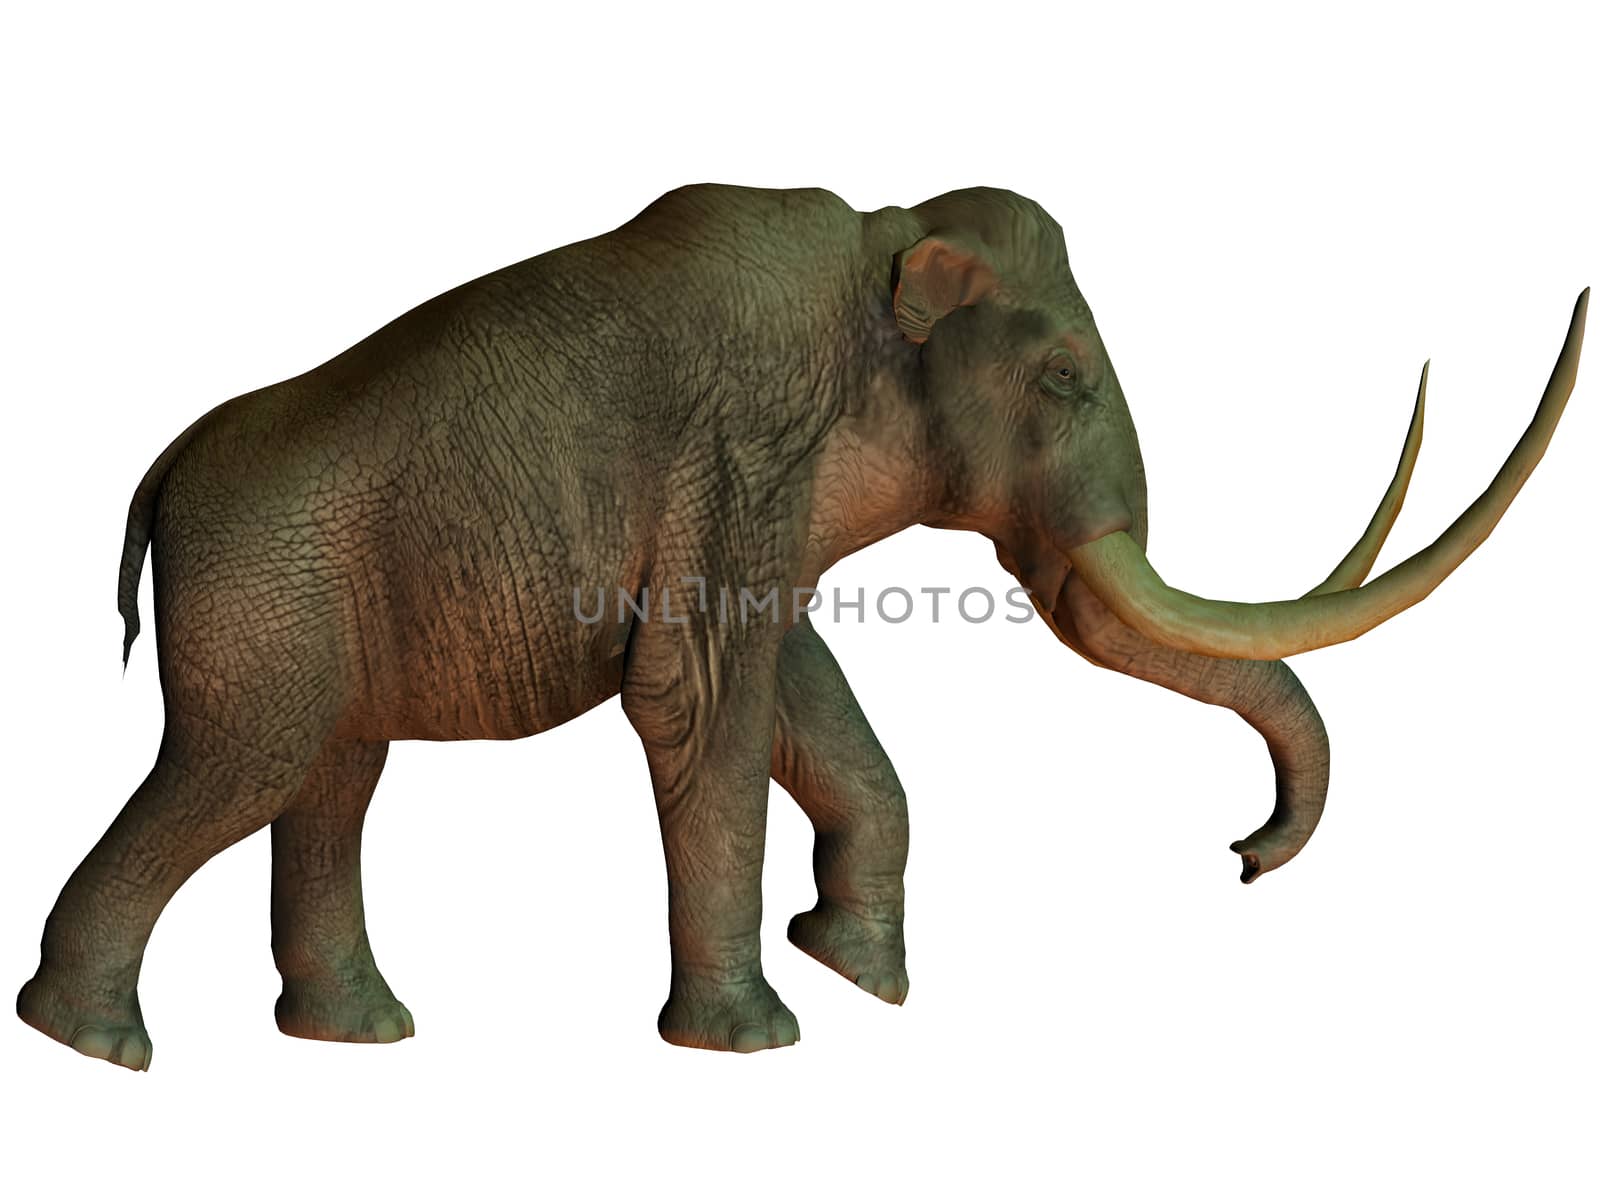 The Columbian mammoth is an extinct species of elephant that inhabited what is now the Americas in the Pleistocene Age.